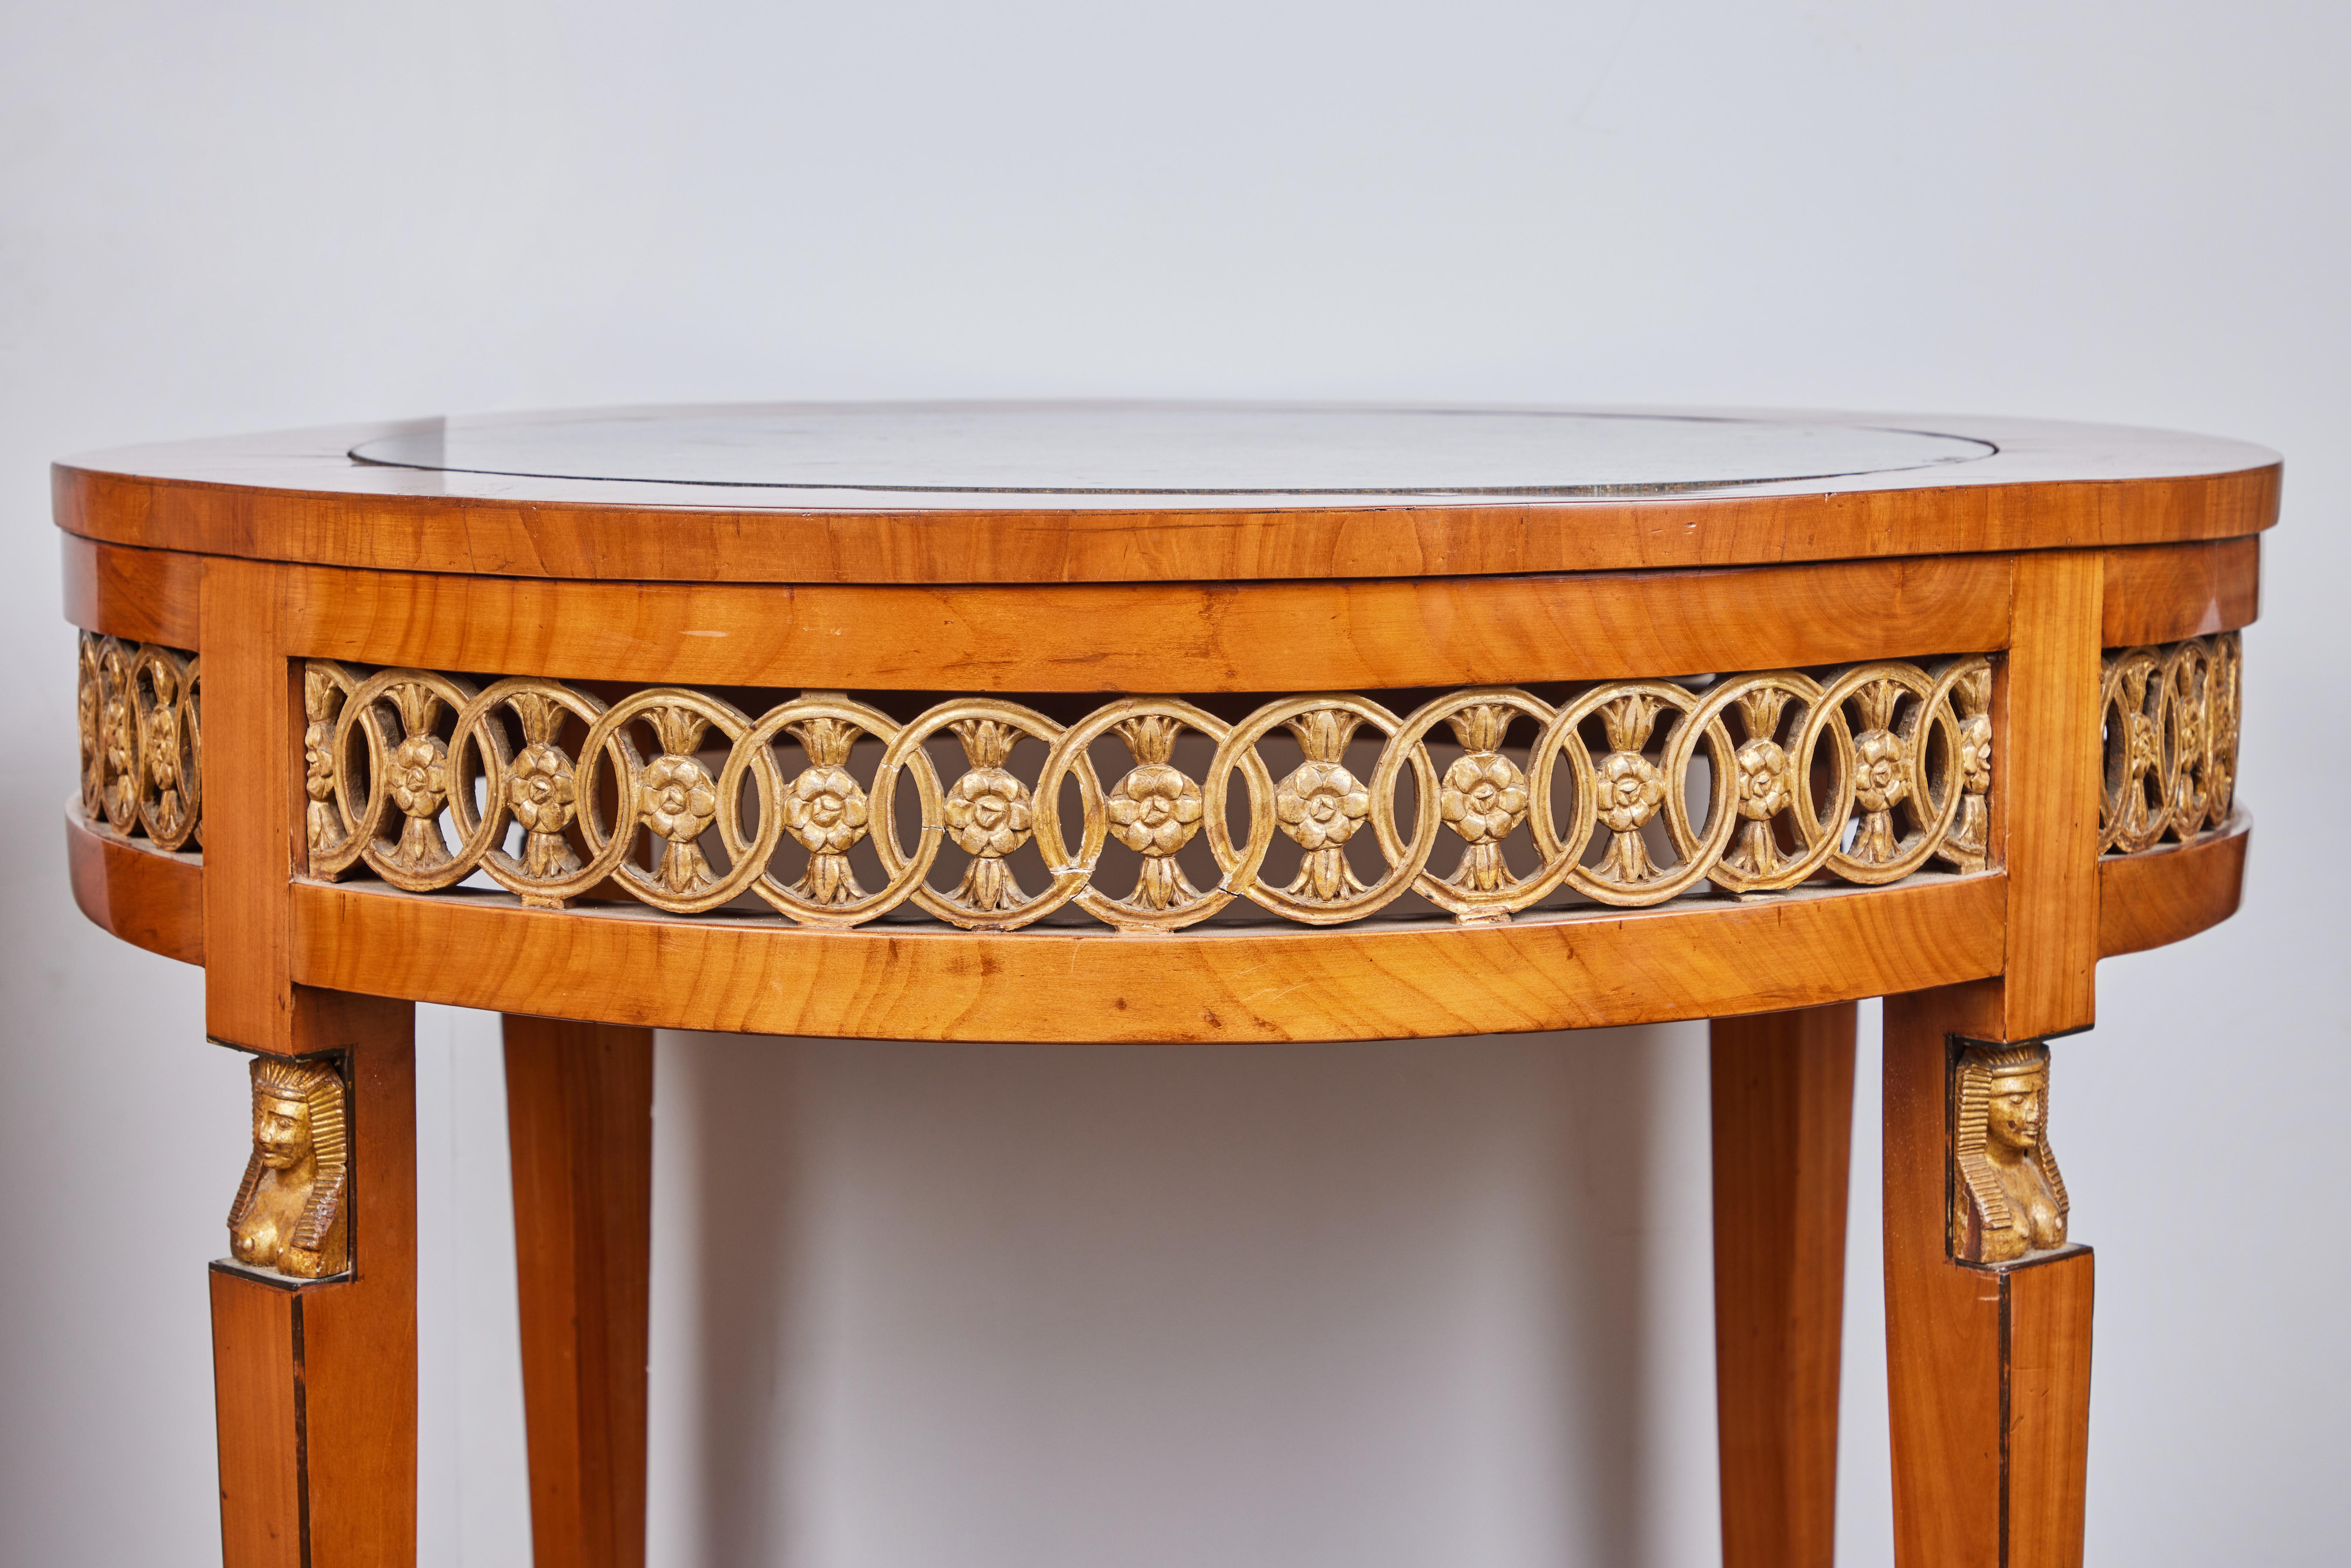 An elegant hand carved round table with inset marble top. The intricate carving in the apron is gilded as is the carved Pharaohs head and feet. The column legs have ebonized trim and the bun feet are ebonized.

